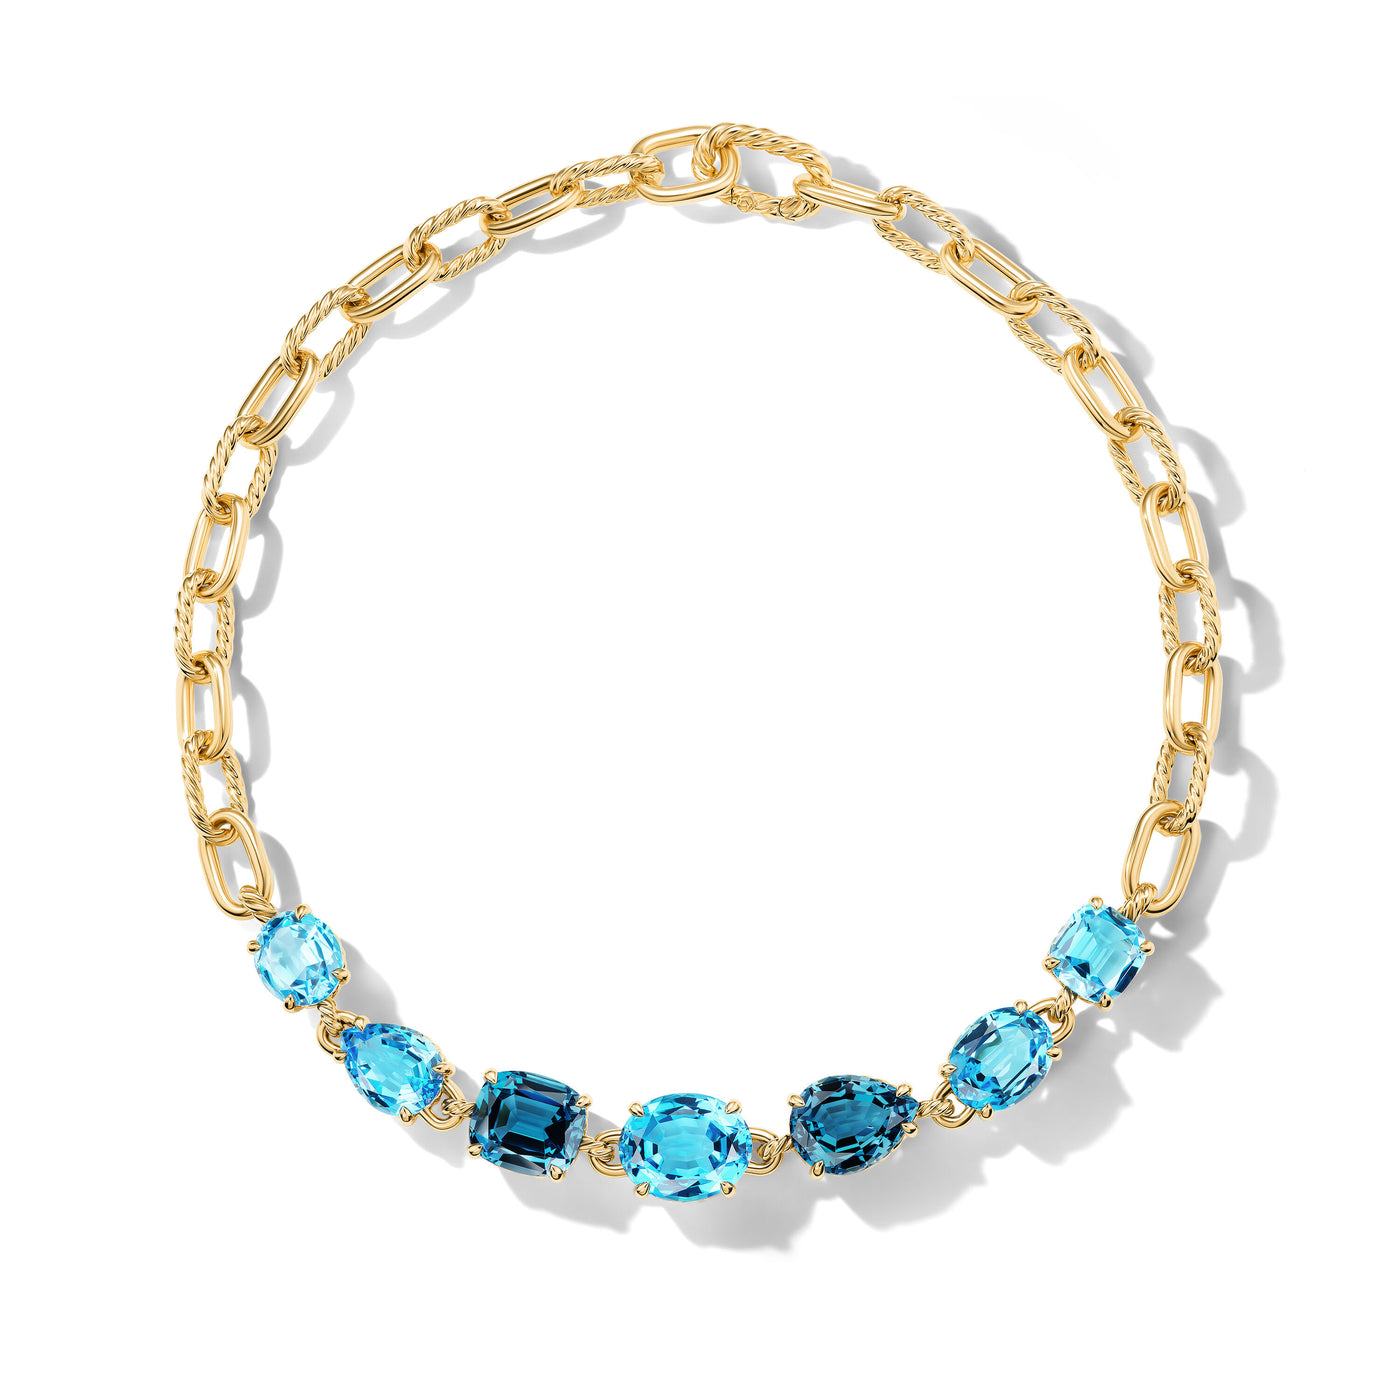 Marbella™ Chain Necklace in 18K Yellow Gold with Blue Topaz and Hampton Blue Topaz\, 8.5mm